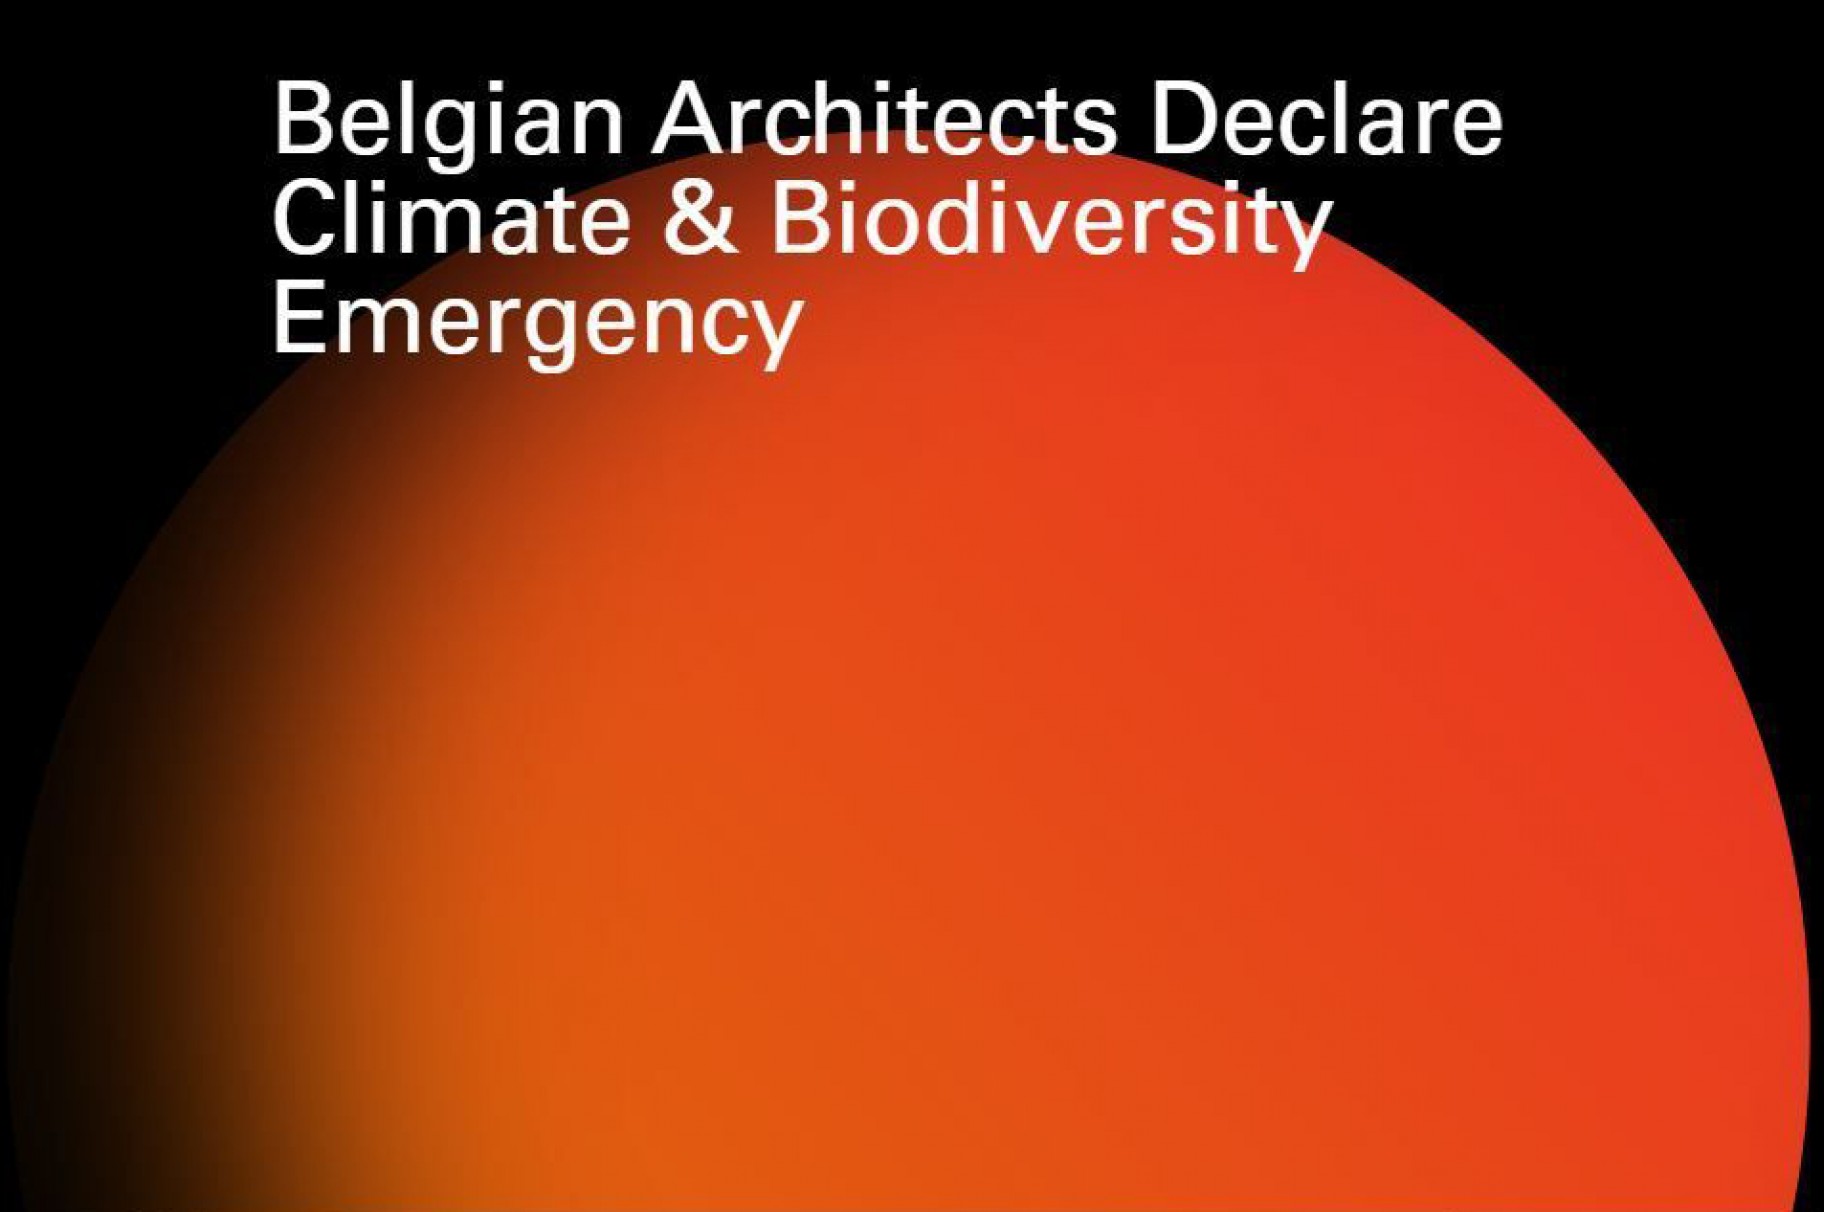 As one of the founding fathers META signs the petition 'Belgian Architects Declare Climate & Biodiversity Emergency'